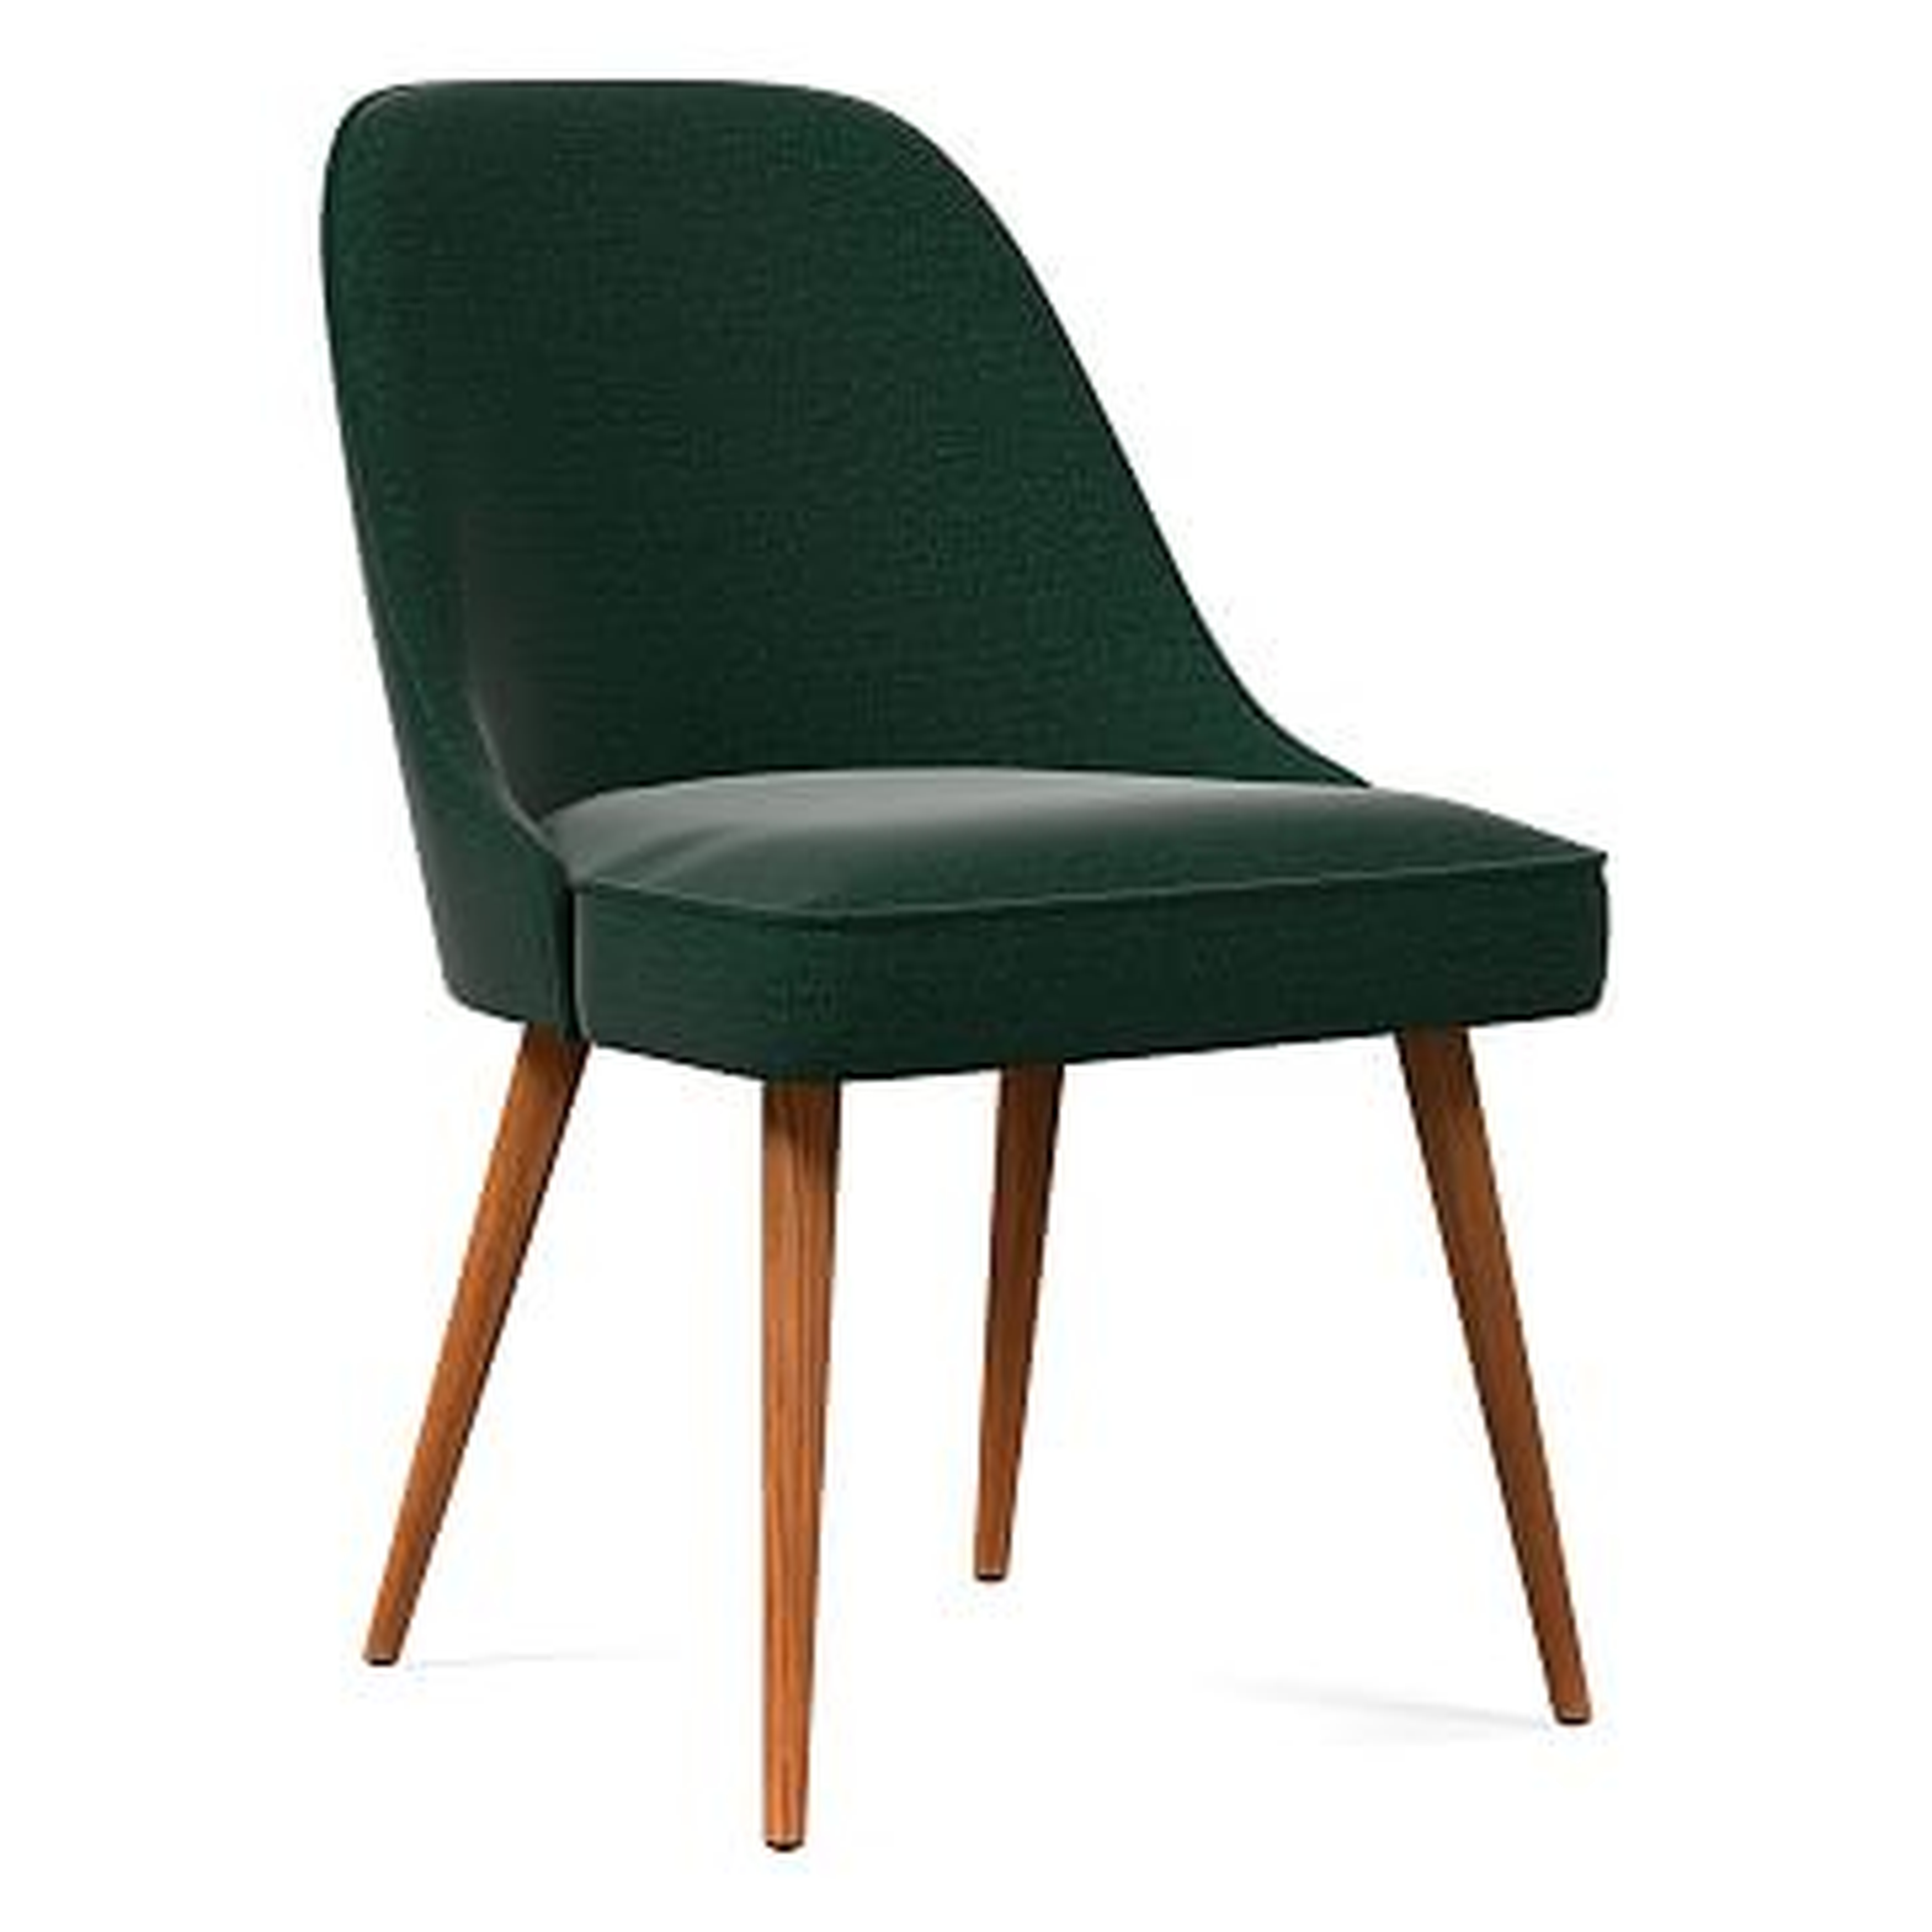 Mid-Century Upholstered Dining Chair, Distressed Velvet, Forest, Pecan - West Elm